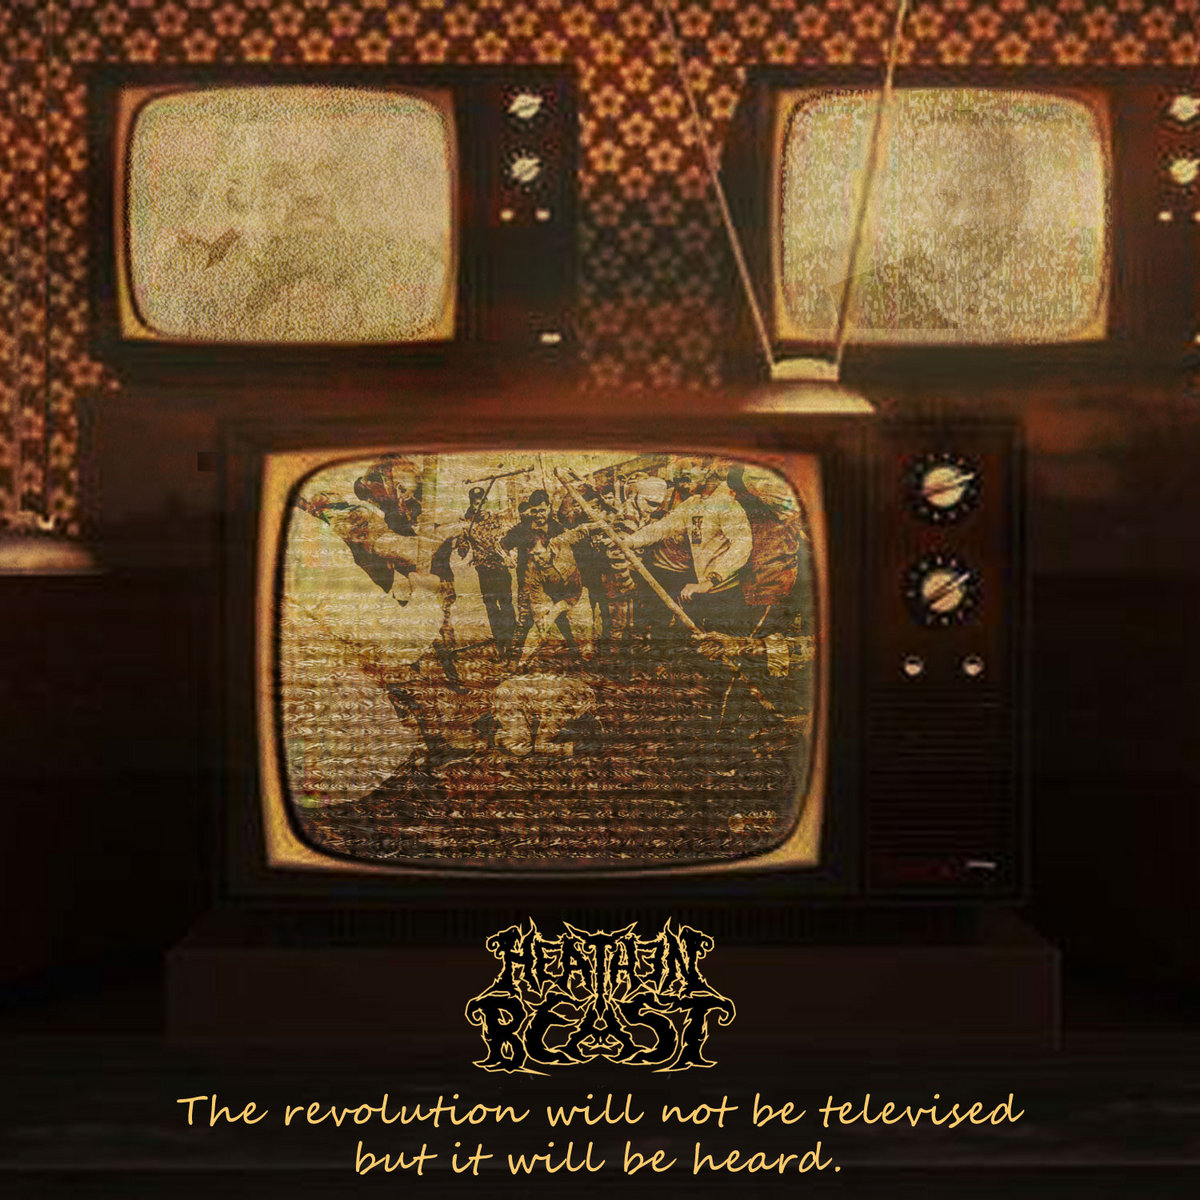 HEATHEN BEAST - The Revolution Will Not Be Televised But It Will Be Heard cover 